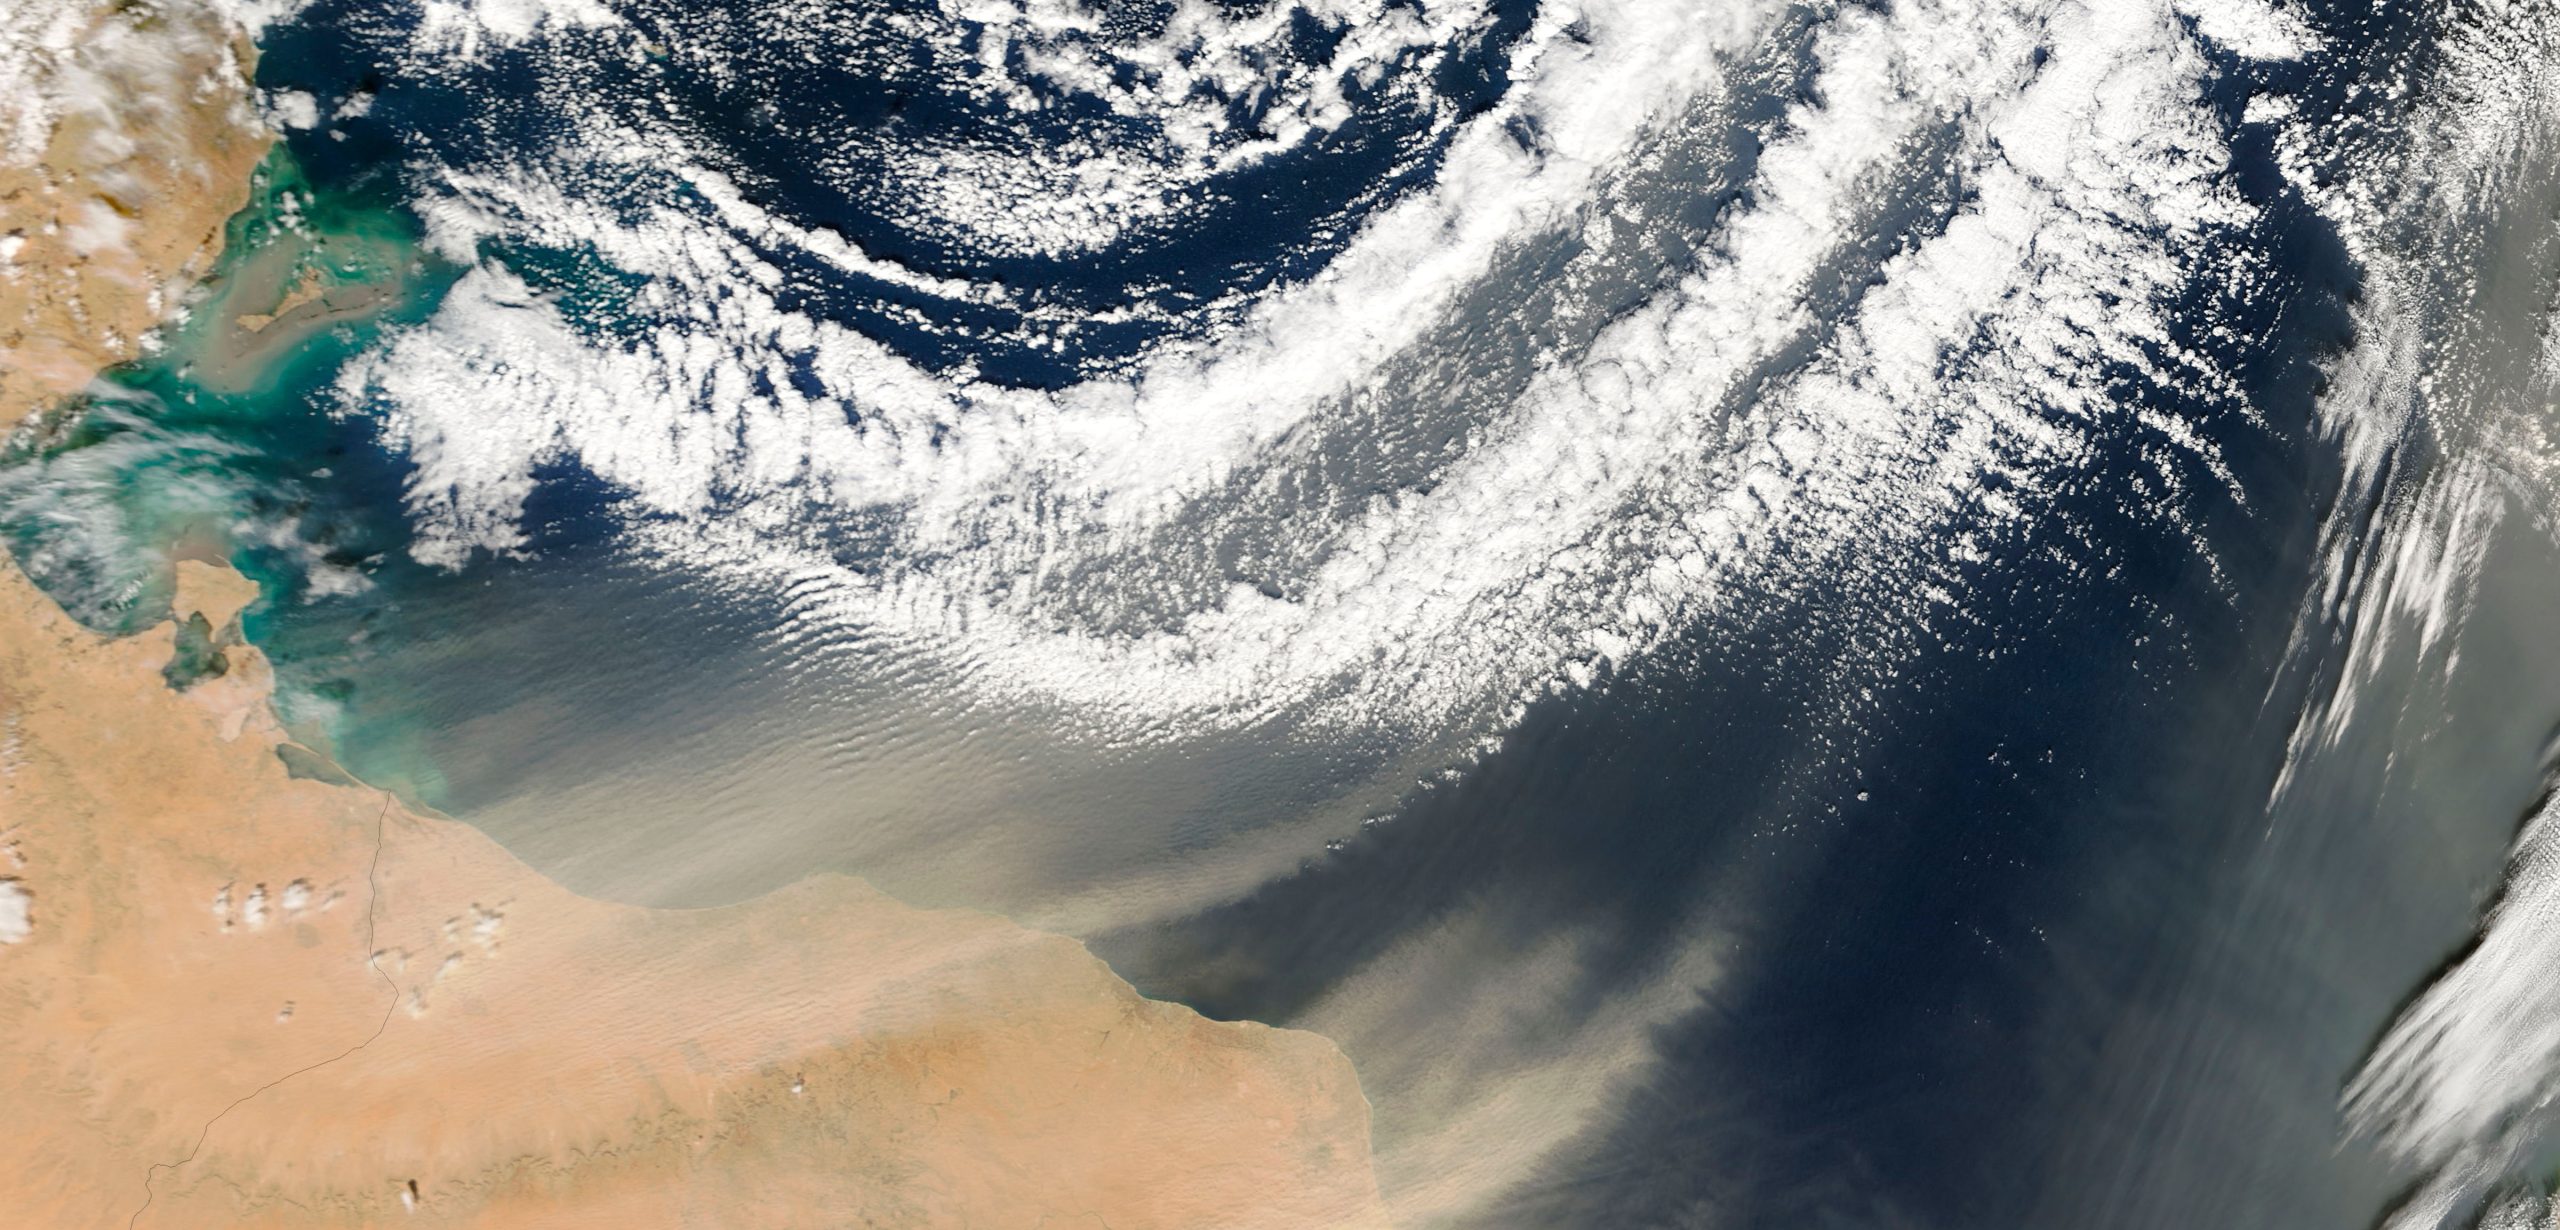 A plume of dust blows off the coast of Africa. Photo by Stocktrek Images, Inc./Alamy Stock Photo